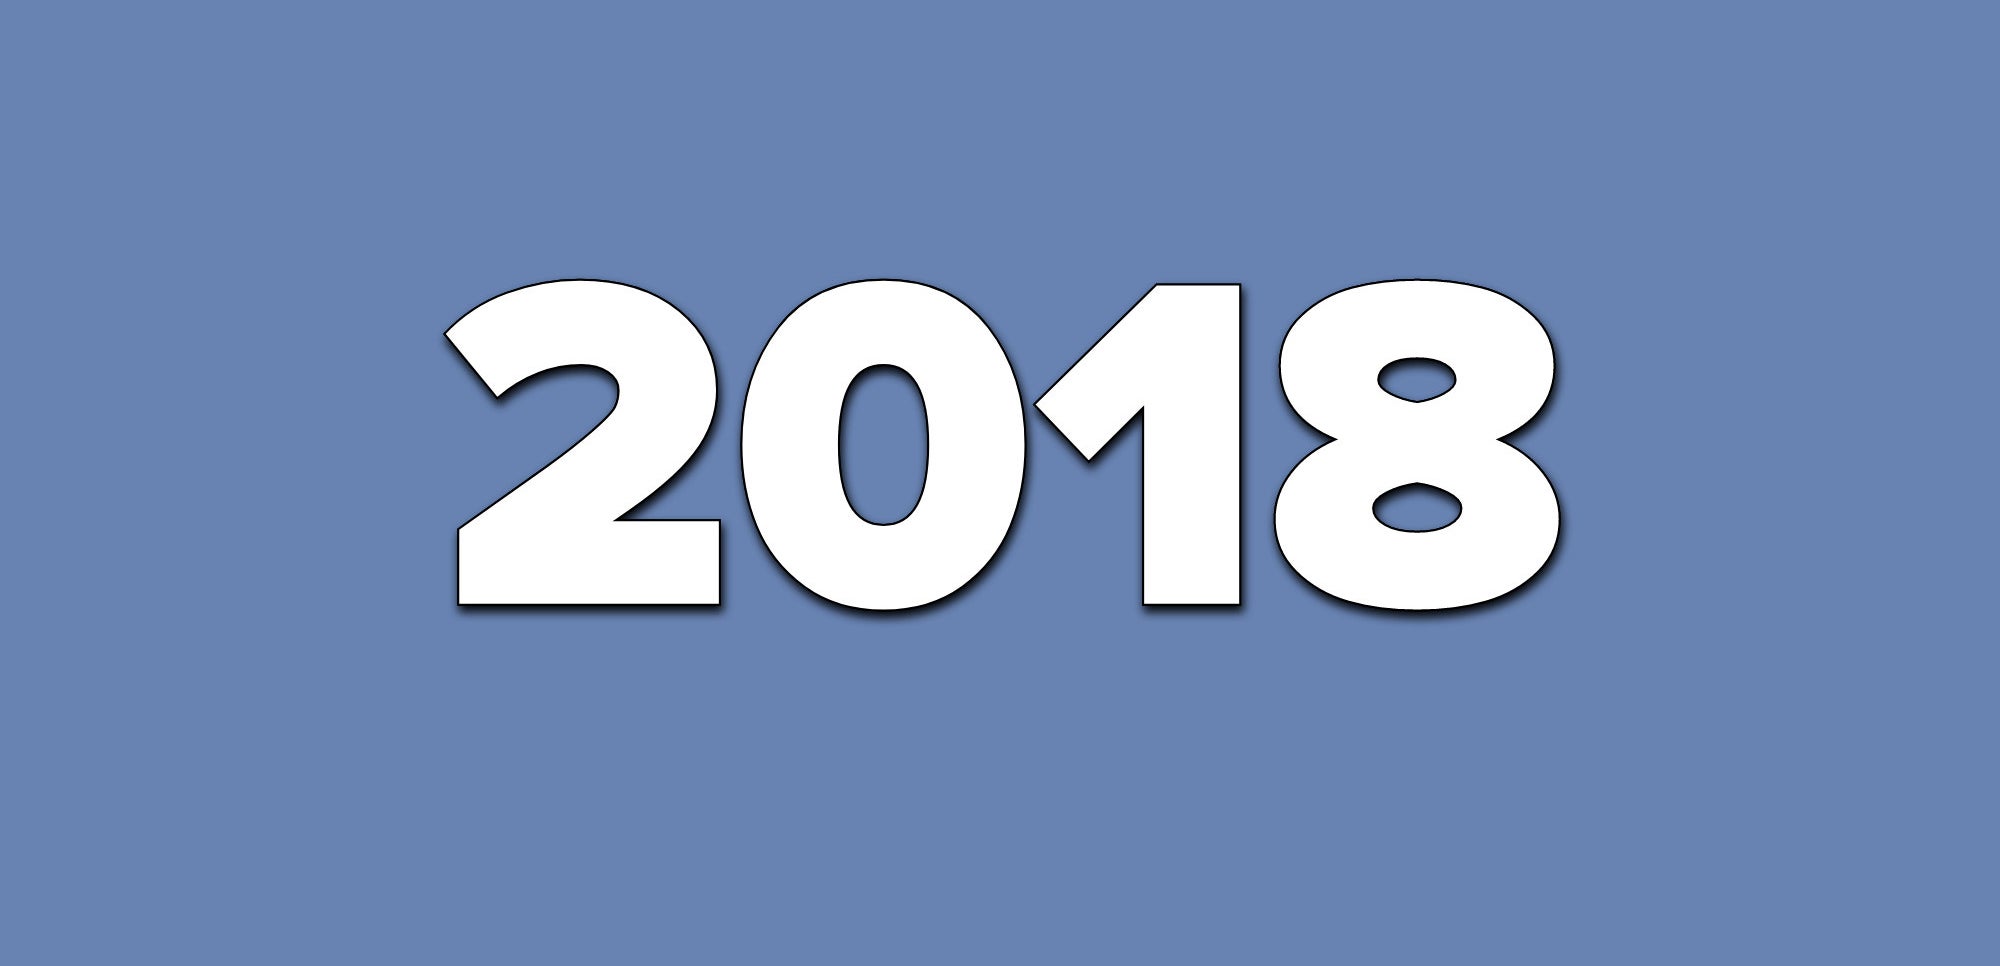 A blue background with text that says 2018